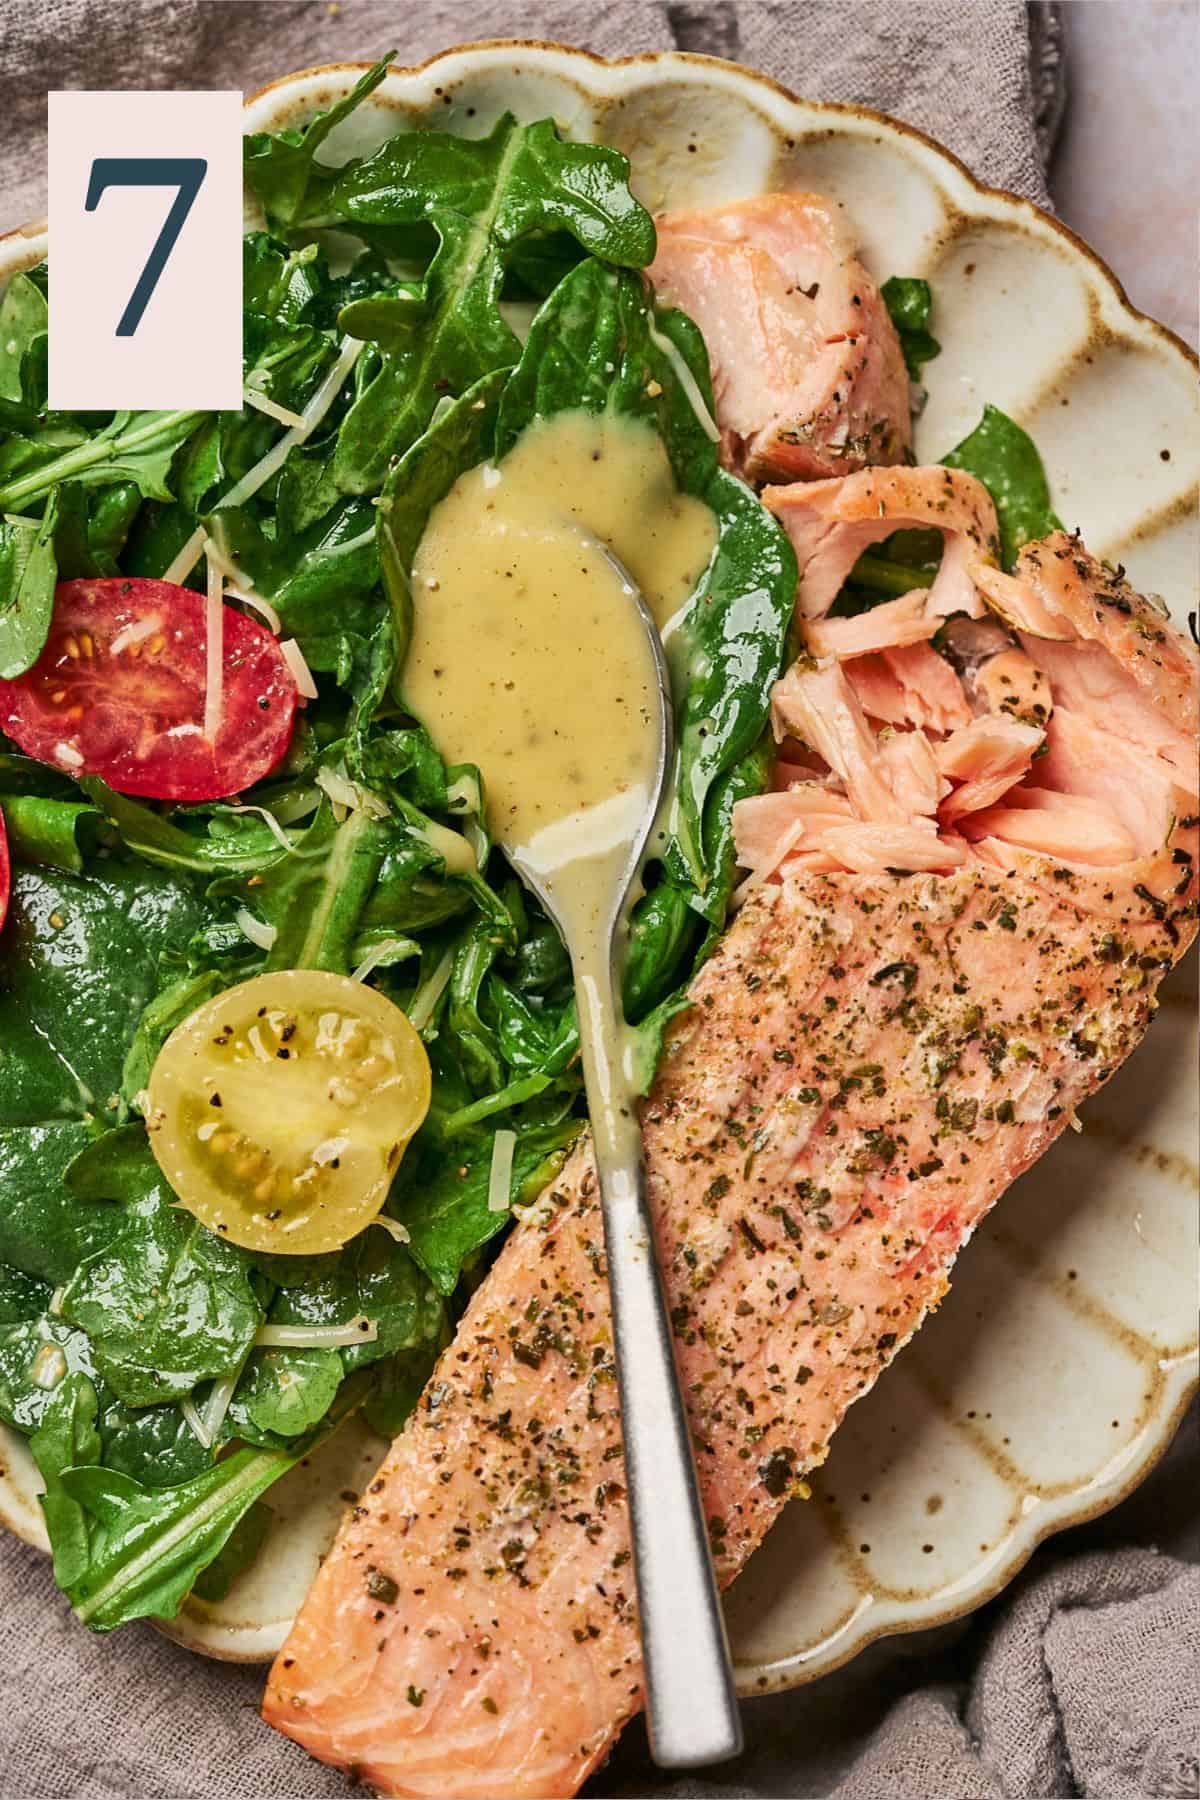 spoonful of honey lemon vinaigrette dressing on top of a simple arugula and spinach salad, with a side of salmon.